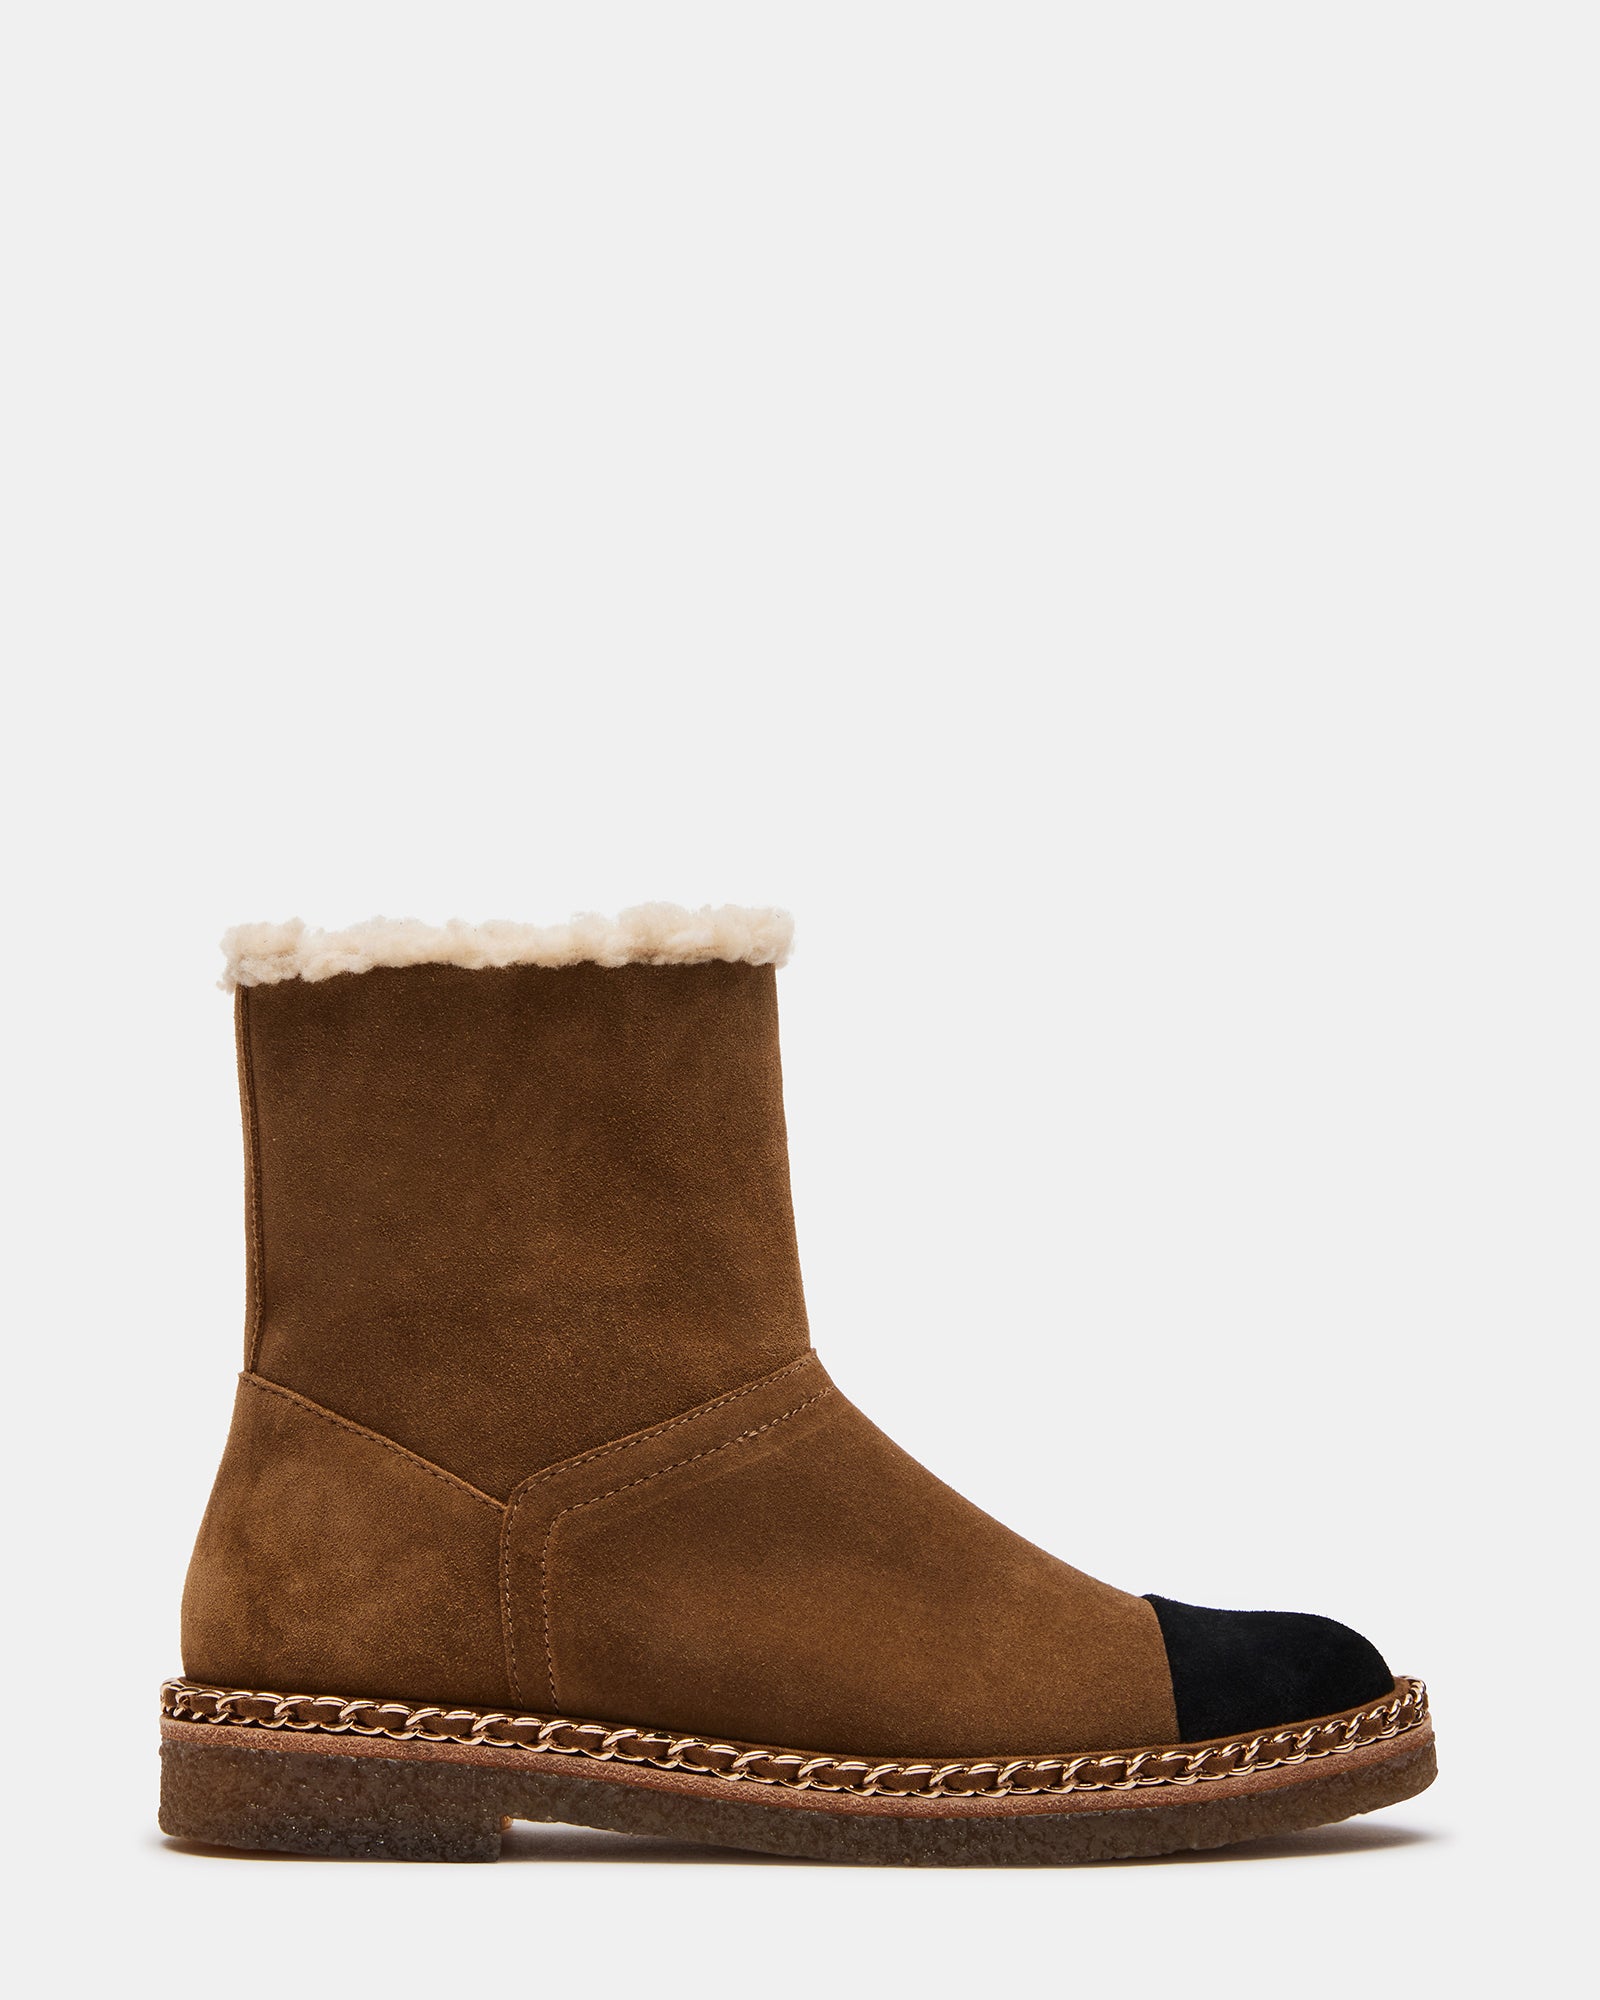 Steve Madden Womens Tayson Shearling Boots Suede Embellished - Chestnut Suede - 6 Medium (B,M)